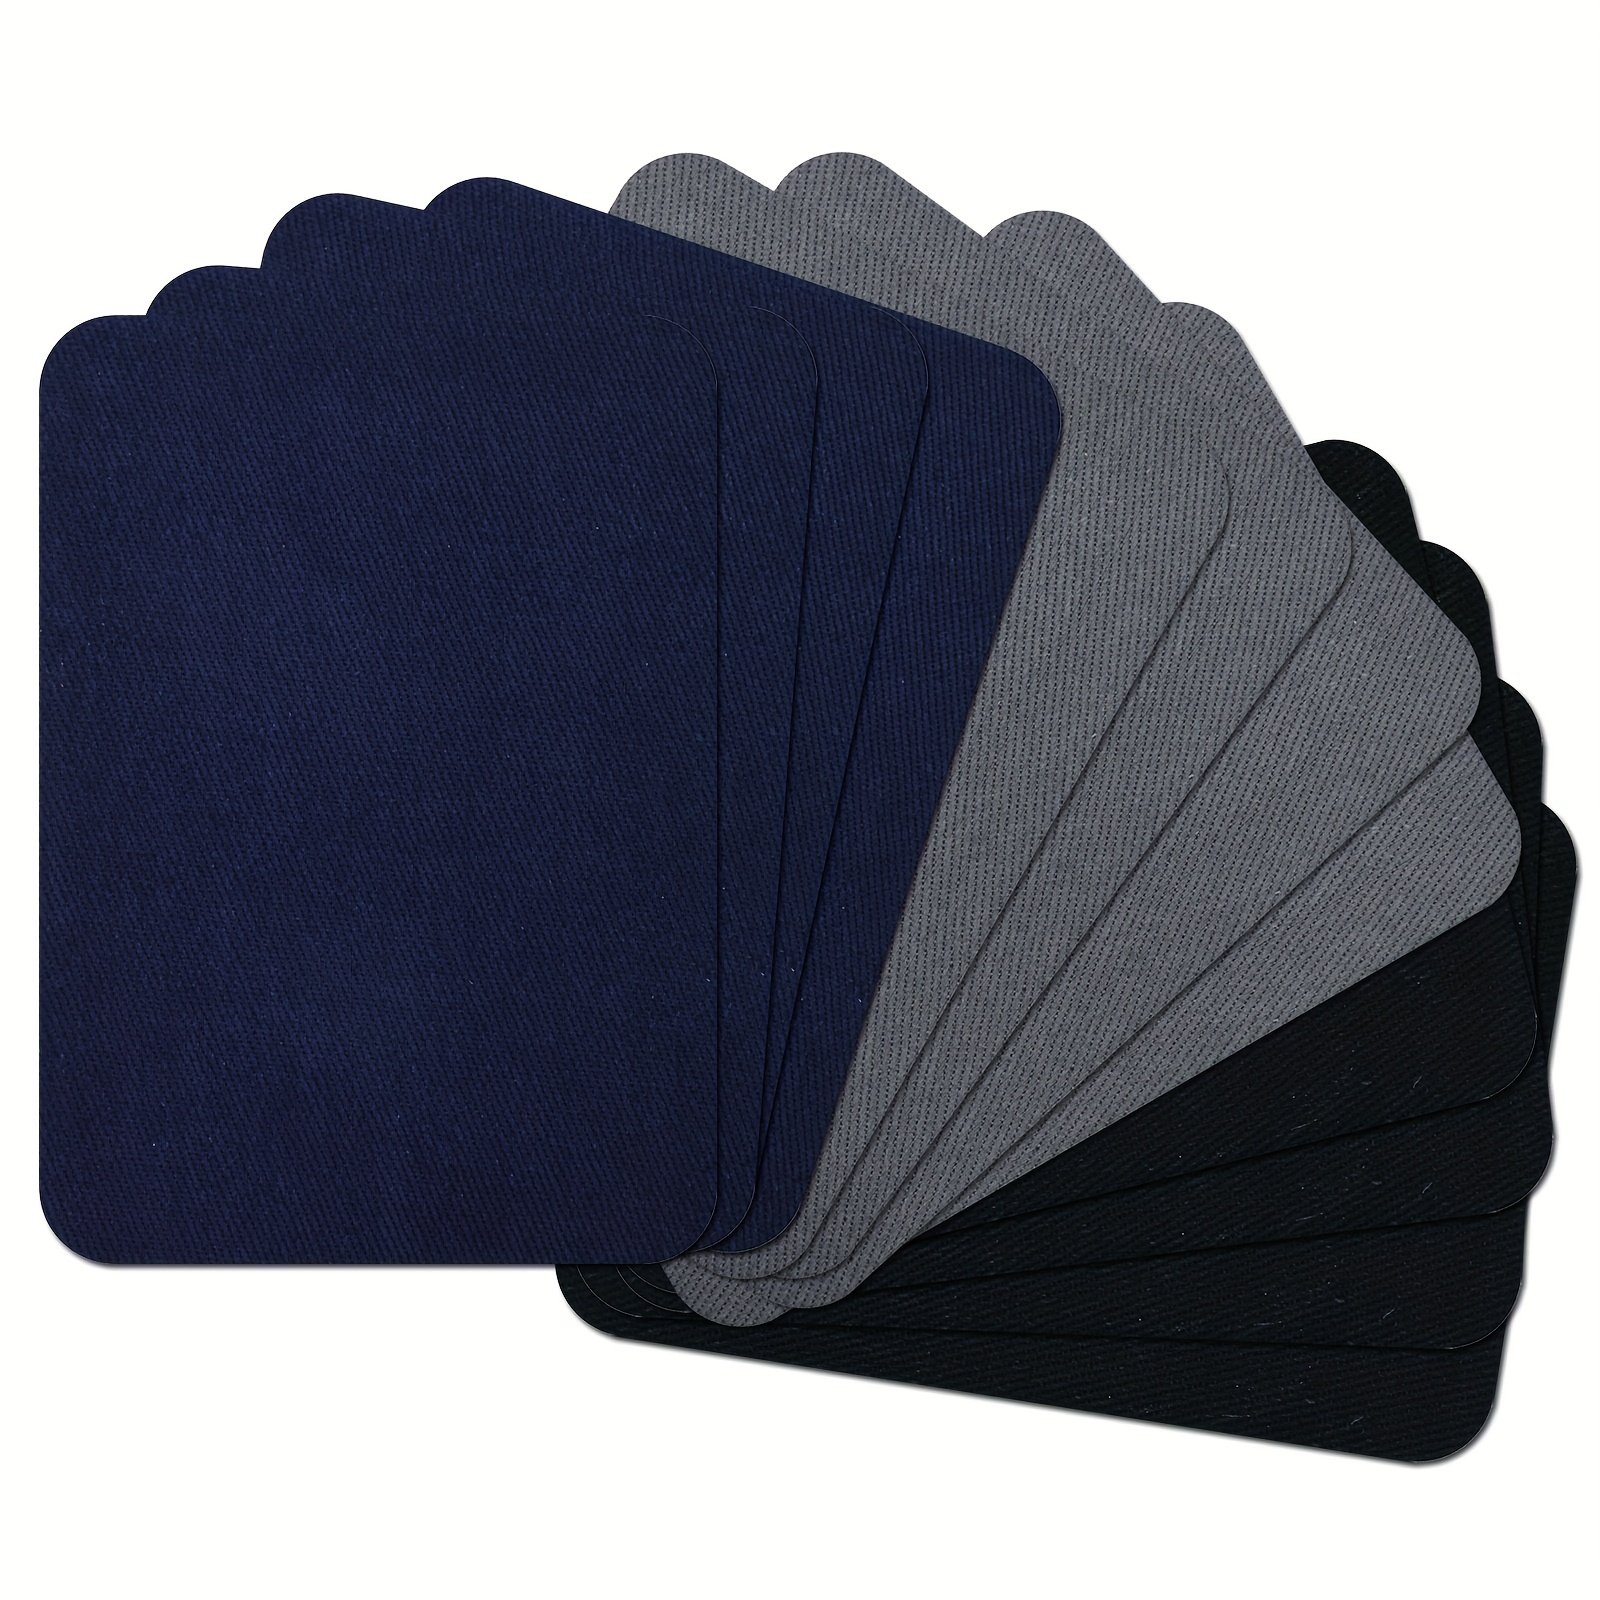 Iron Fabric Adhesive Patch, Fabric Repair Patch